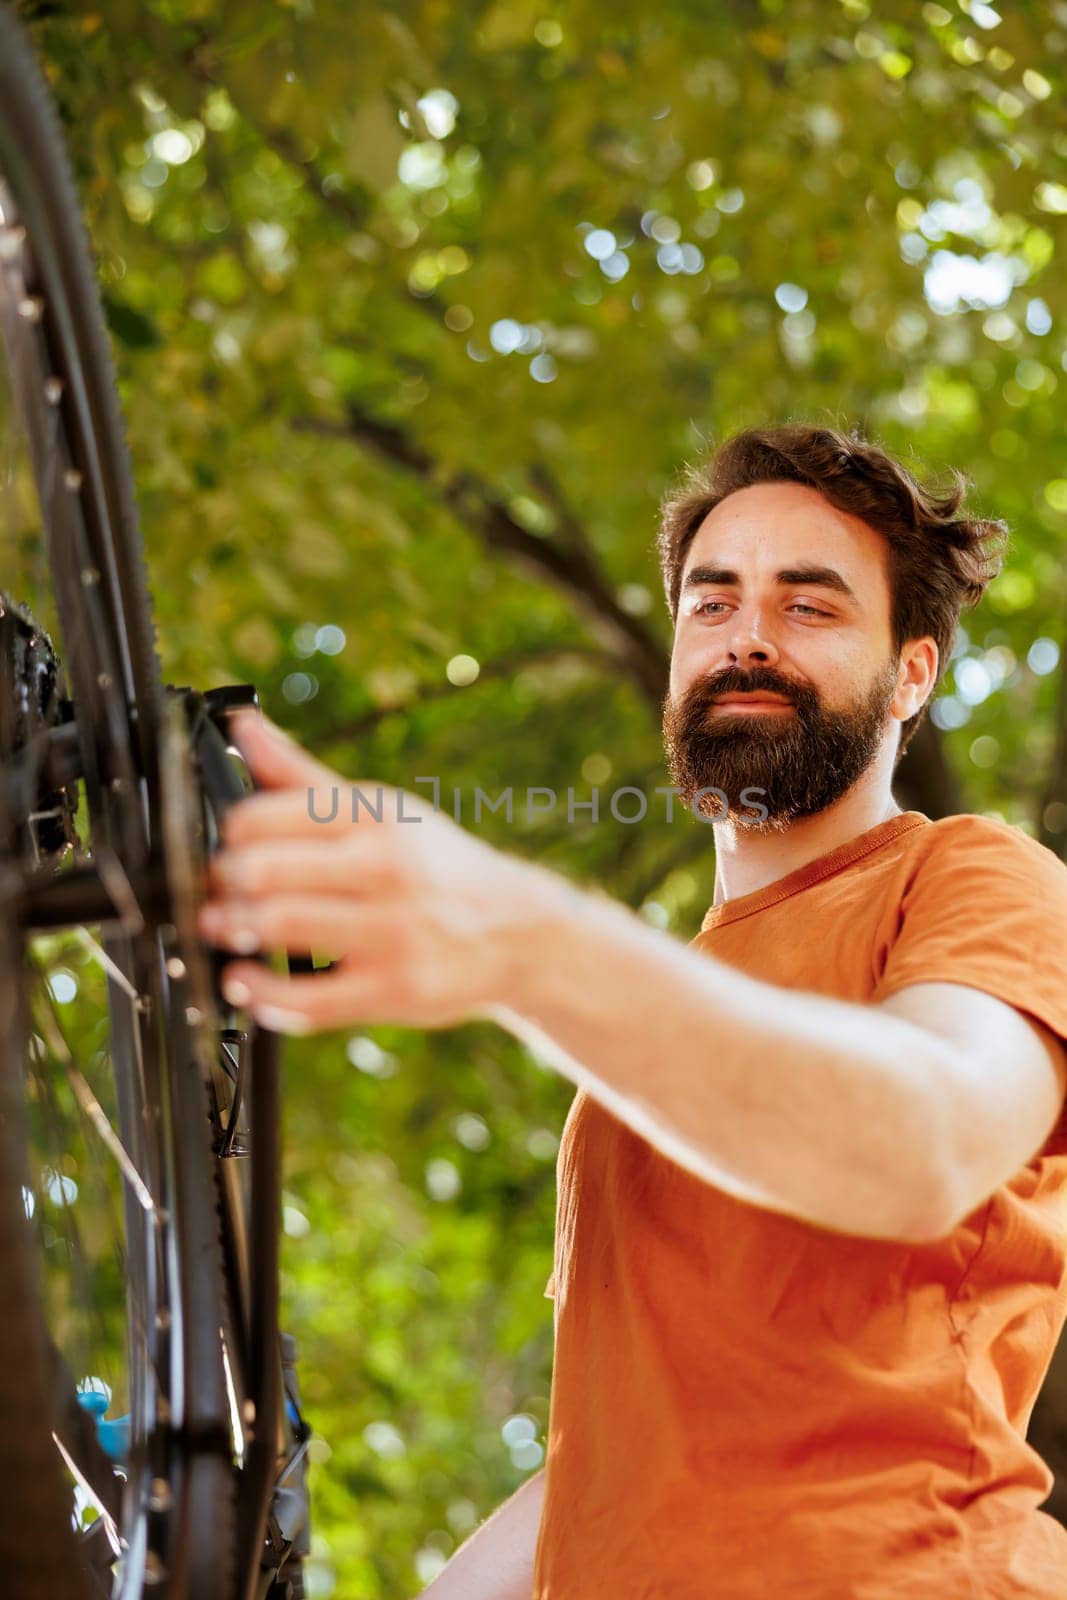 Close-up of young healthy caucasian man examining and adjusting bike wheel rubber and chain outside. Image showing enthusiastic sporty male working on bicycle chain ring in home yard.